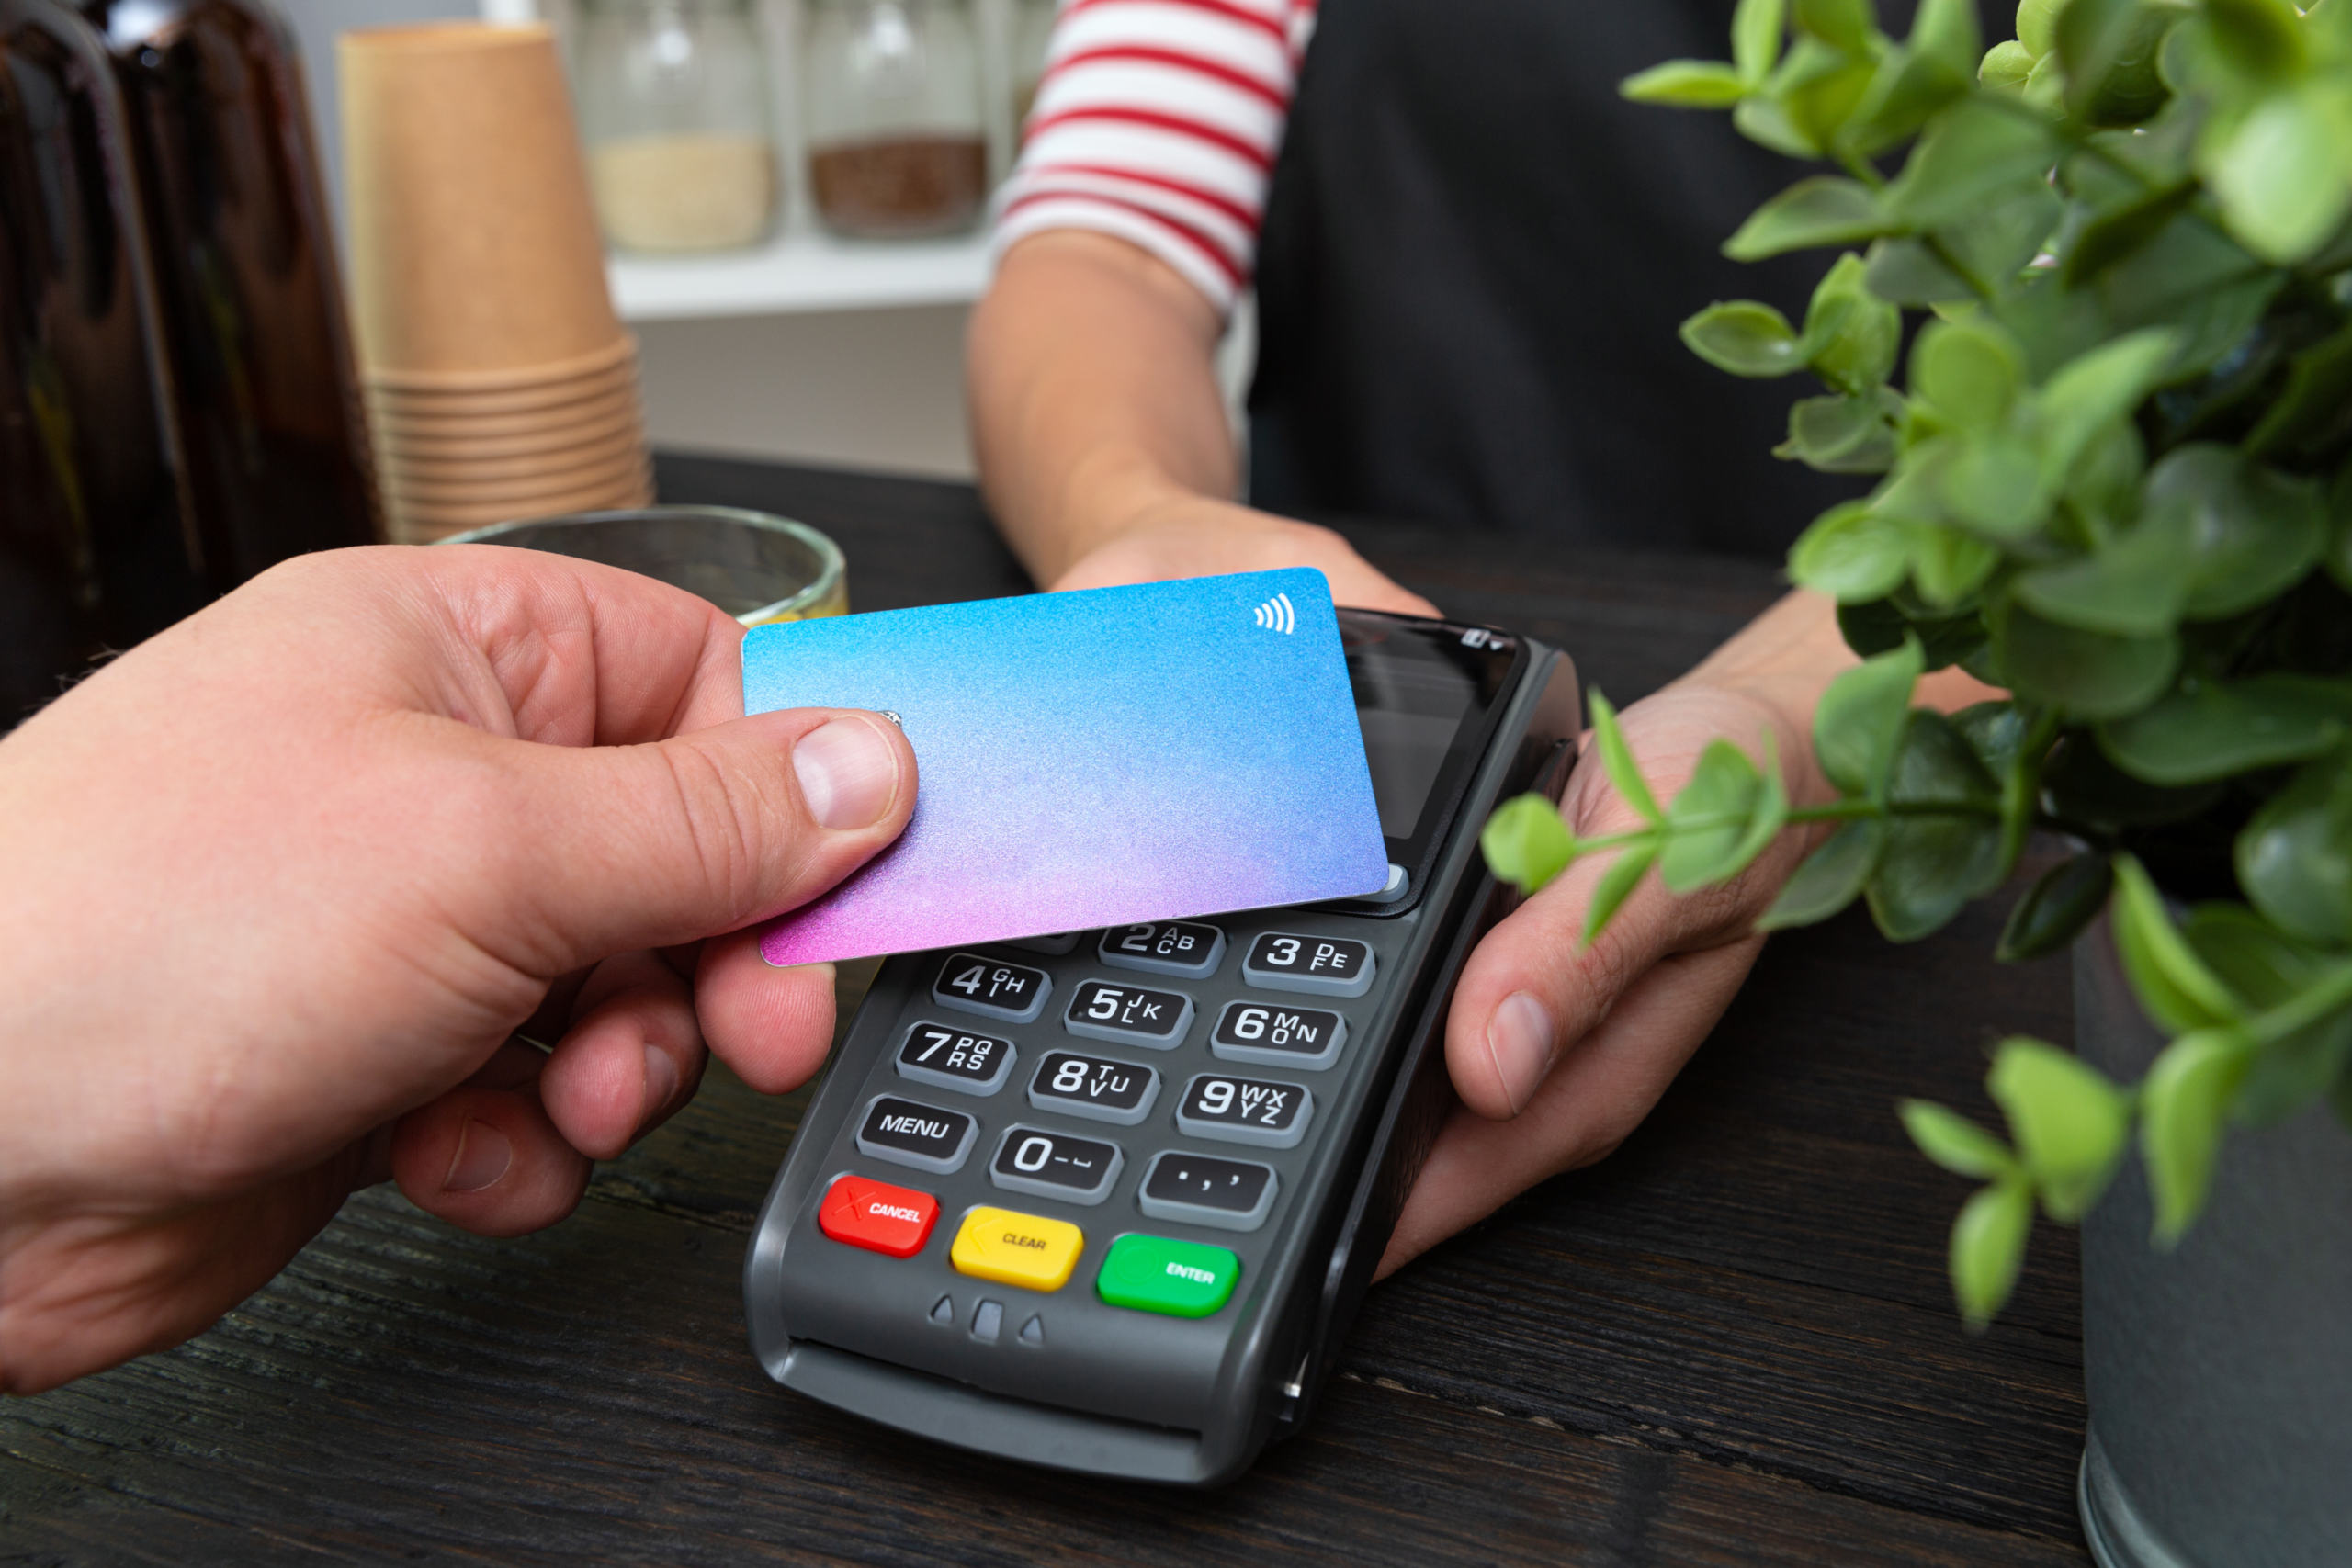 Contactless payment solutions